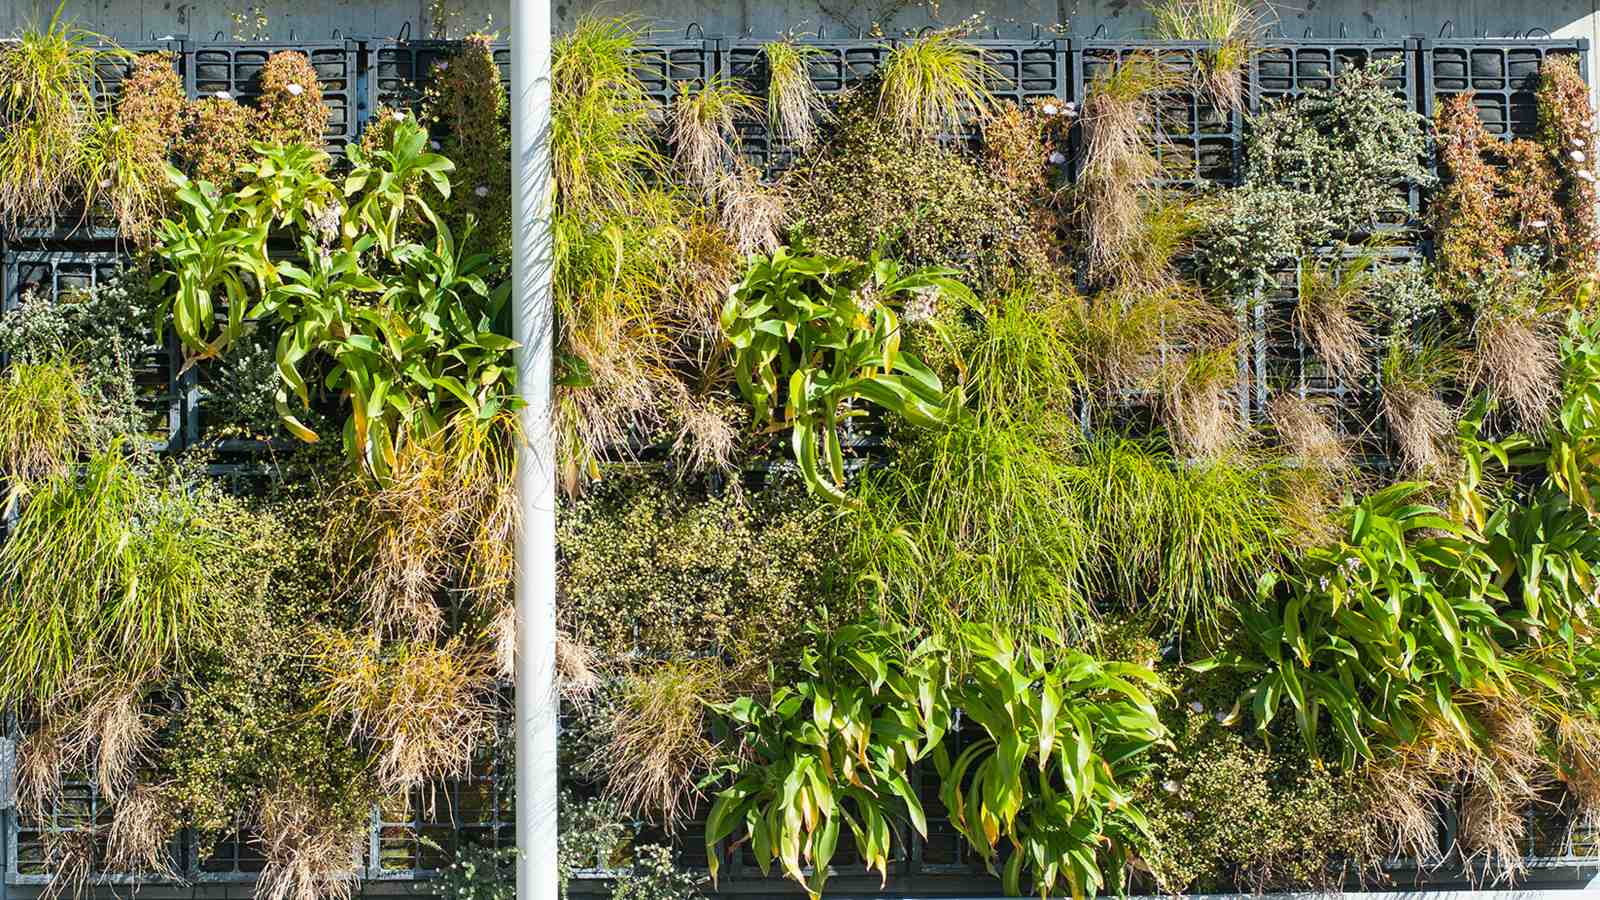 The green wall of native plants seen from Kelburn Parade